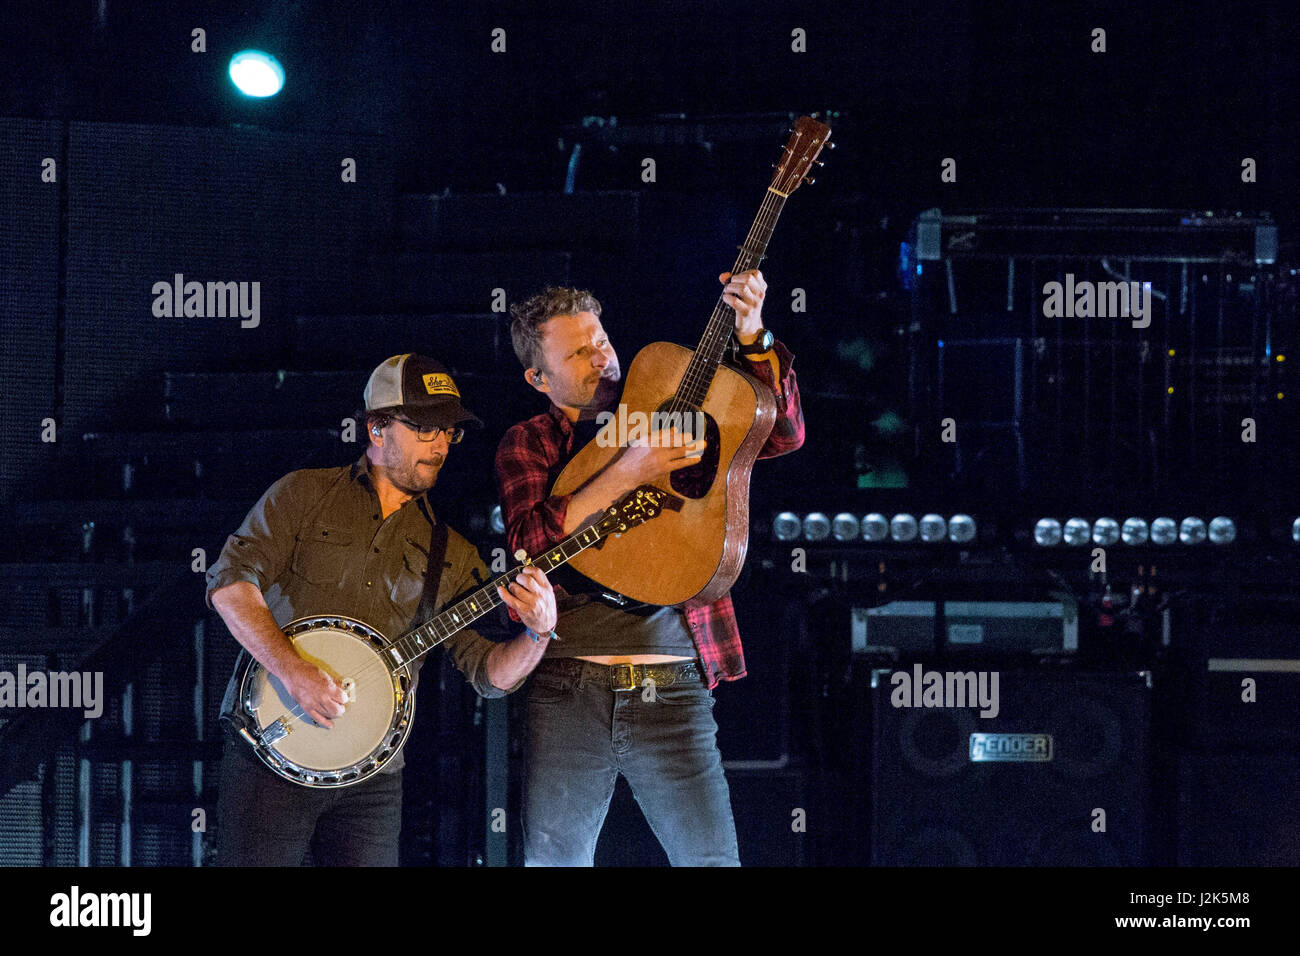 Indio, California, USA. 28th Apr, 2017. Country musician DIERKS BENTLEY during Stagecoach Music Festival in Indio, California Credit: Daniel DeSlover/ZUMA Wire/Alamy Live News Stock Photo